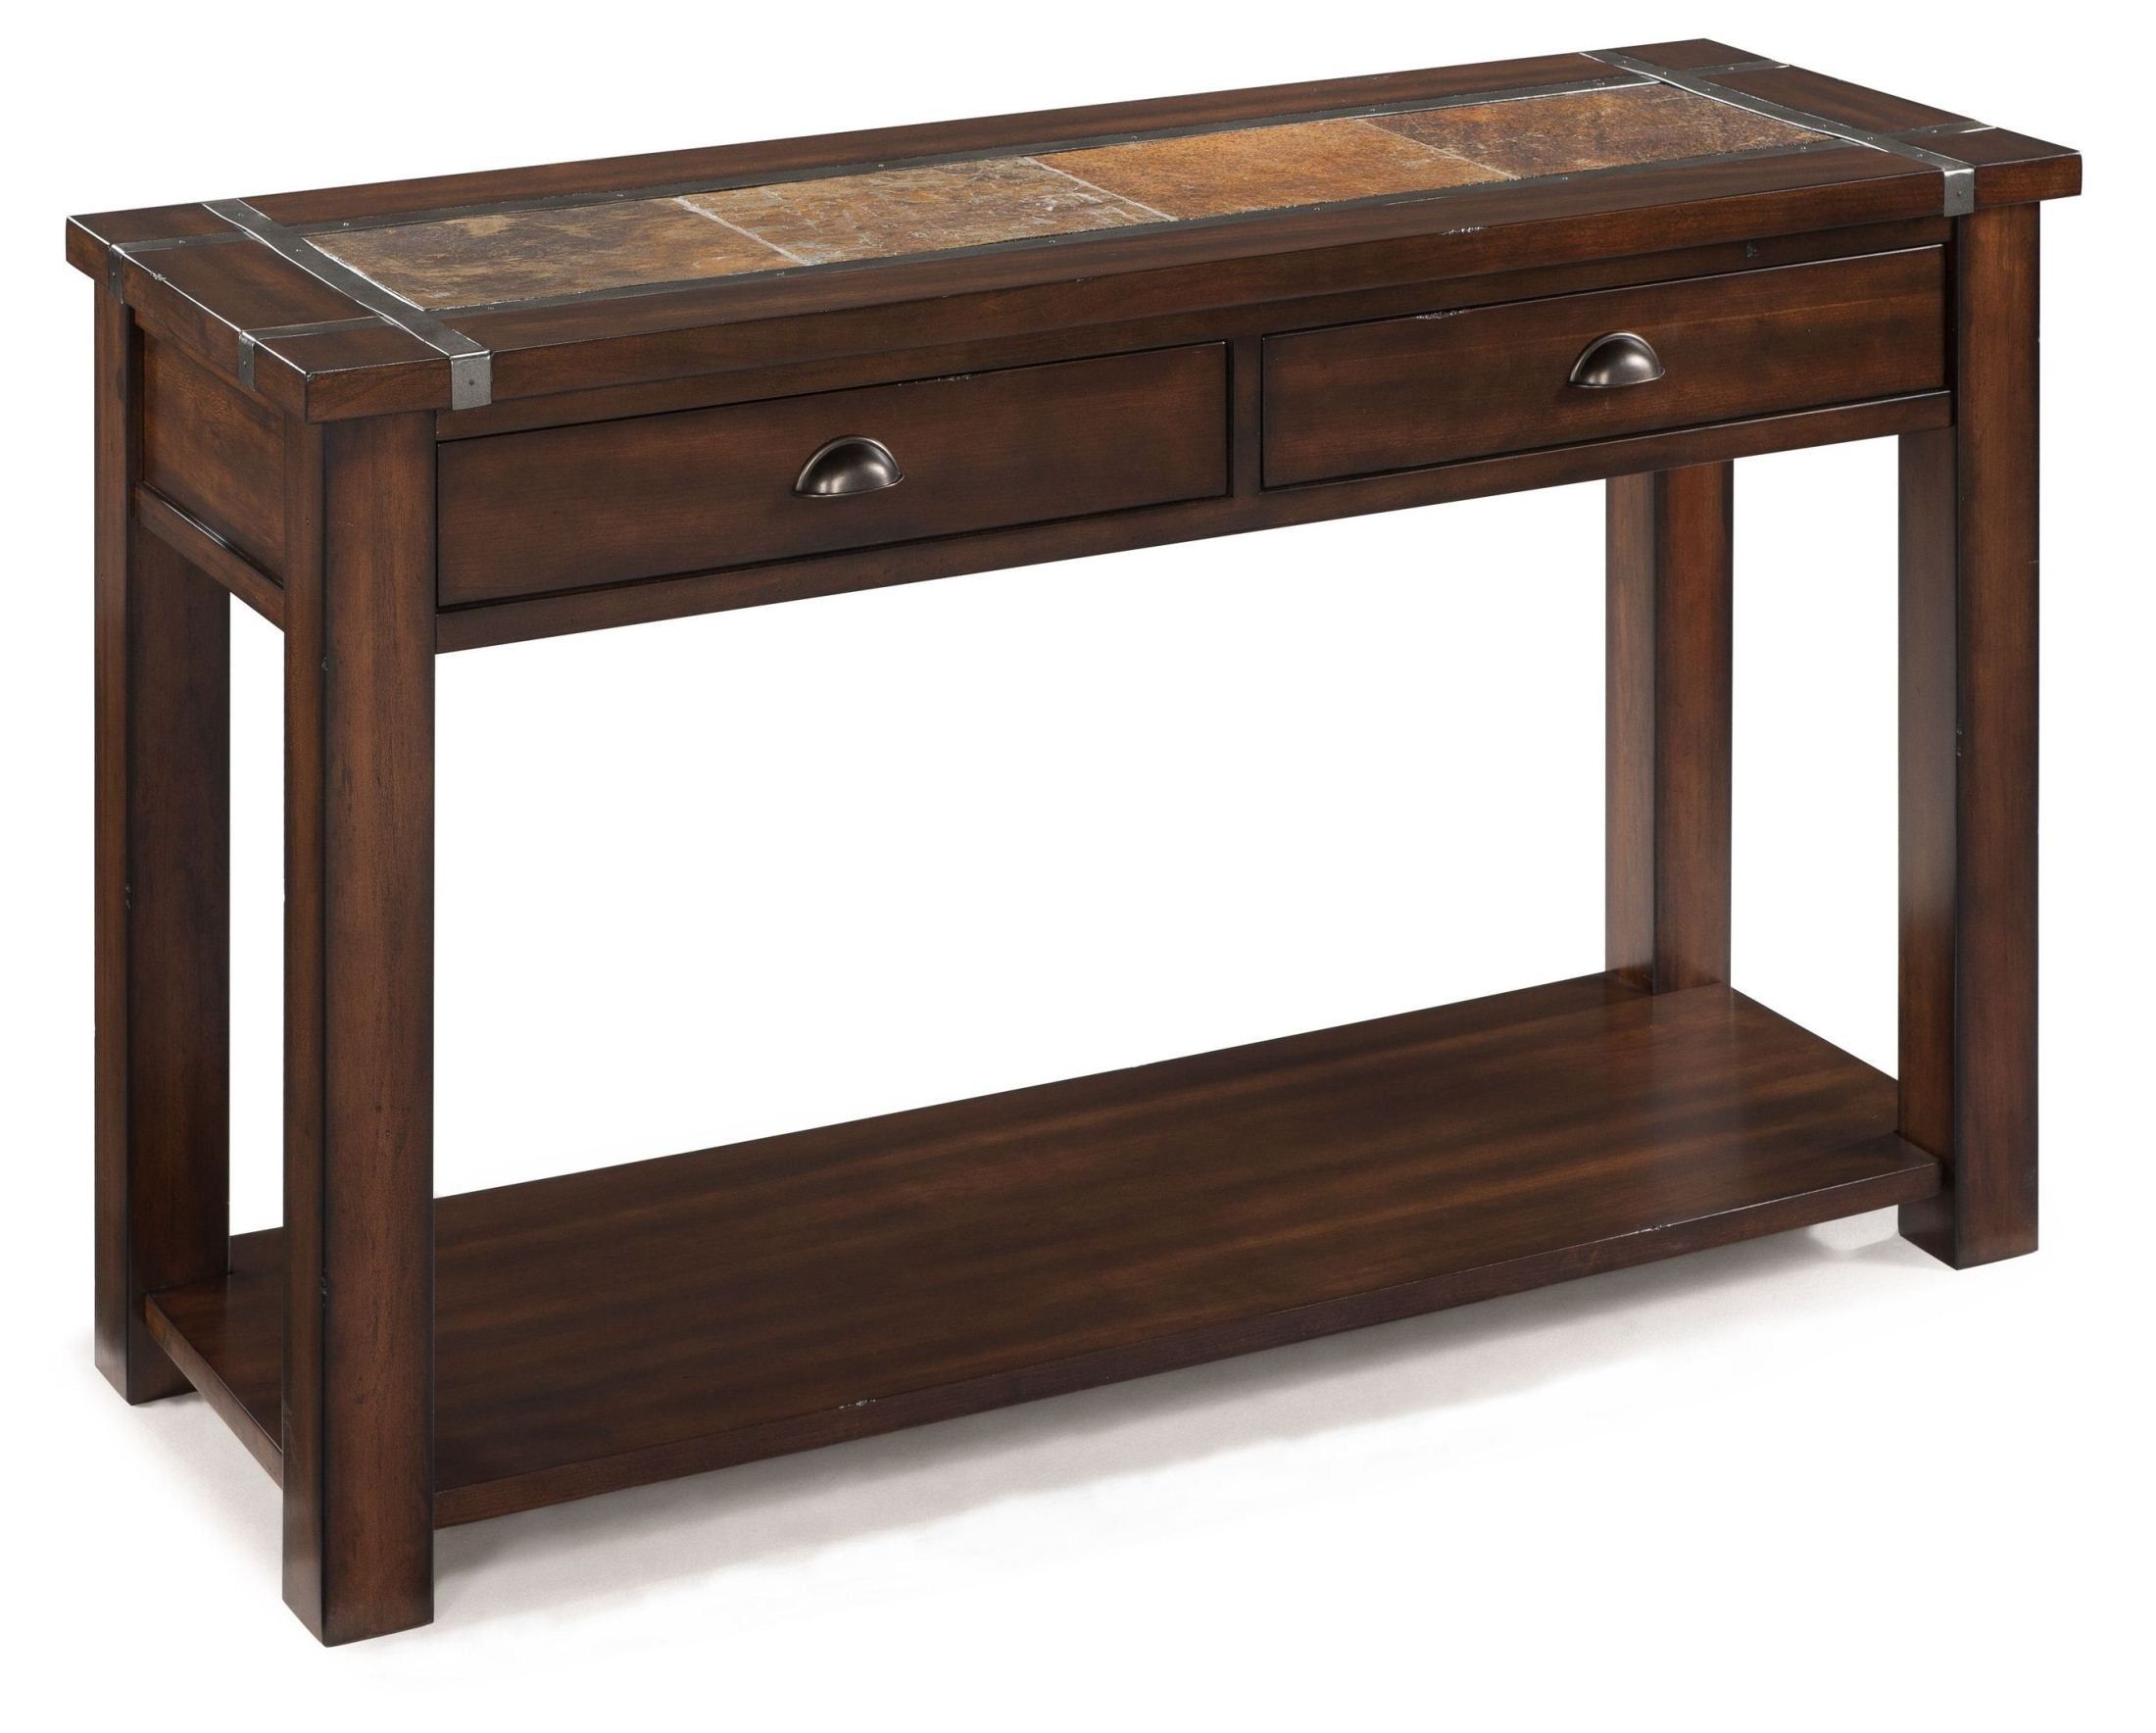 Roanoke Rectangular Sofa Table From Magnussen Home (t2615 With Bronze Metal Rectangular Console Tables (View 8 of 20)